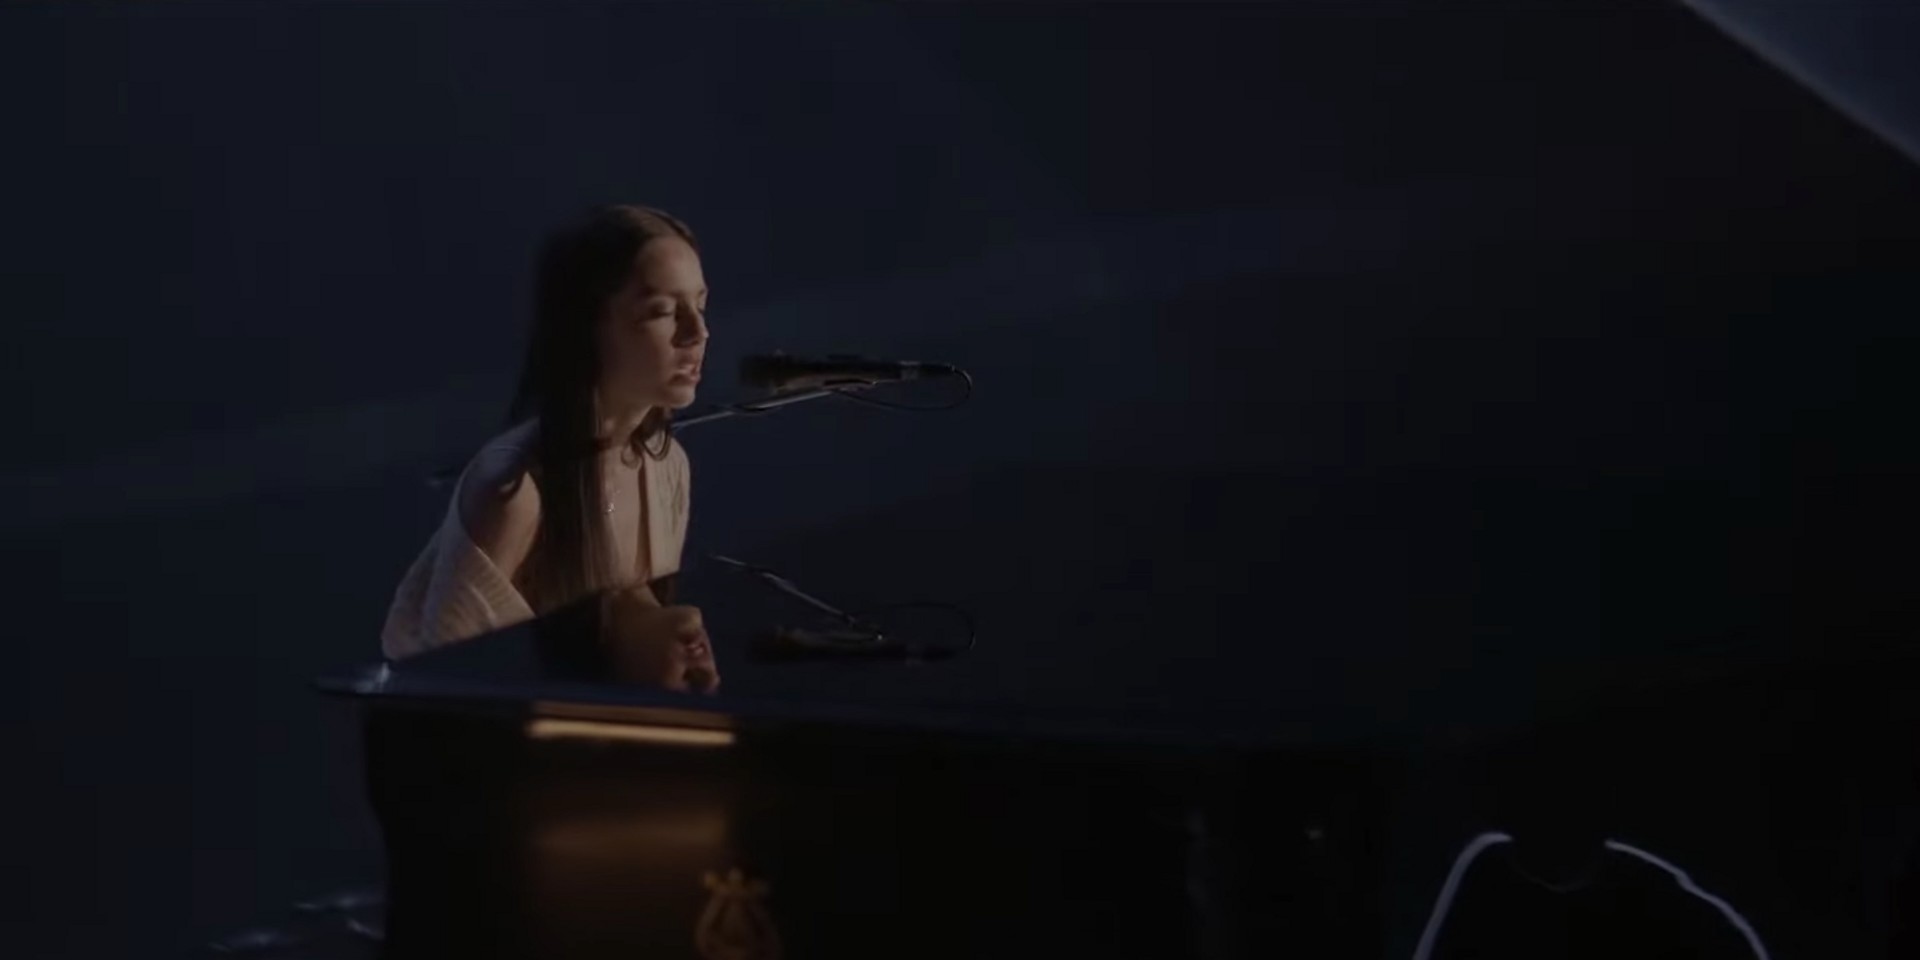 Olivia Rodrigo makes her TV debut with 'drivers license' on The Tonight Show Starring Jimmy Fallon – watch